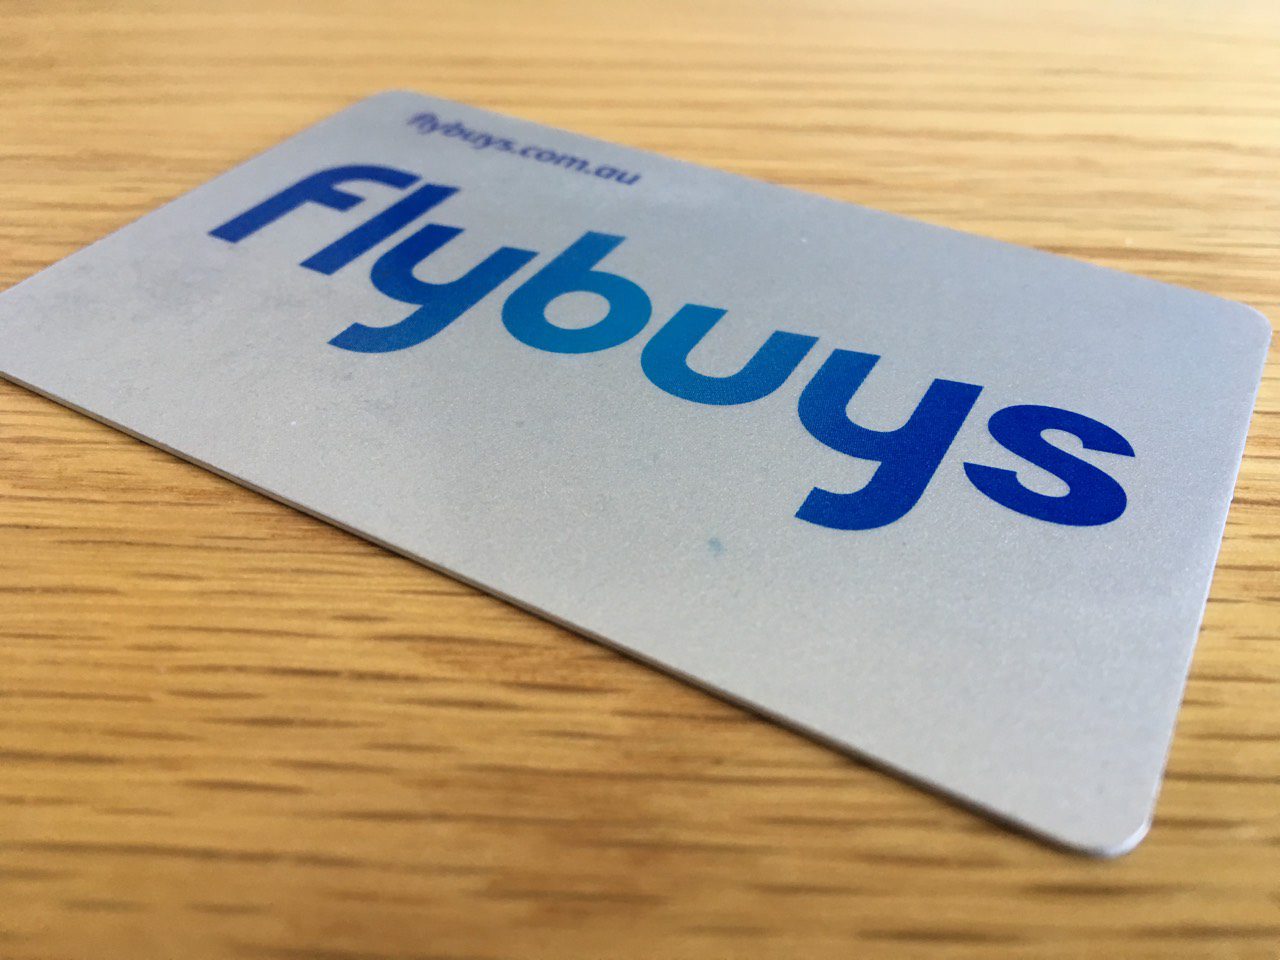 eftsure + Microsoft Dynamics 365 F&O: Helping flybuys secure its B2B payments